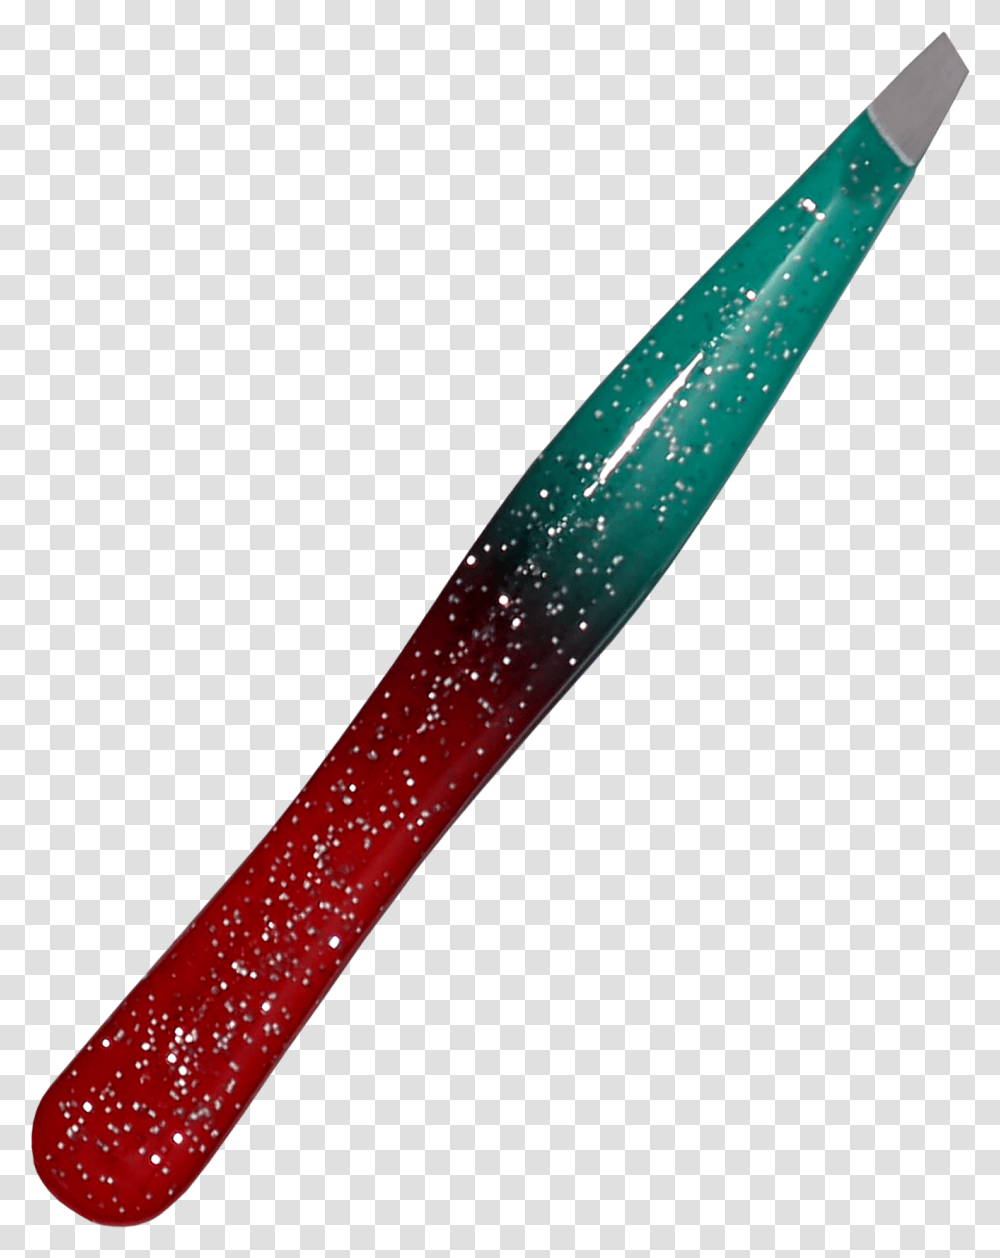 Teal And Red Sparkle Ski, Tool, Brush, Toothbrush Transparent Png